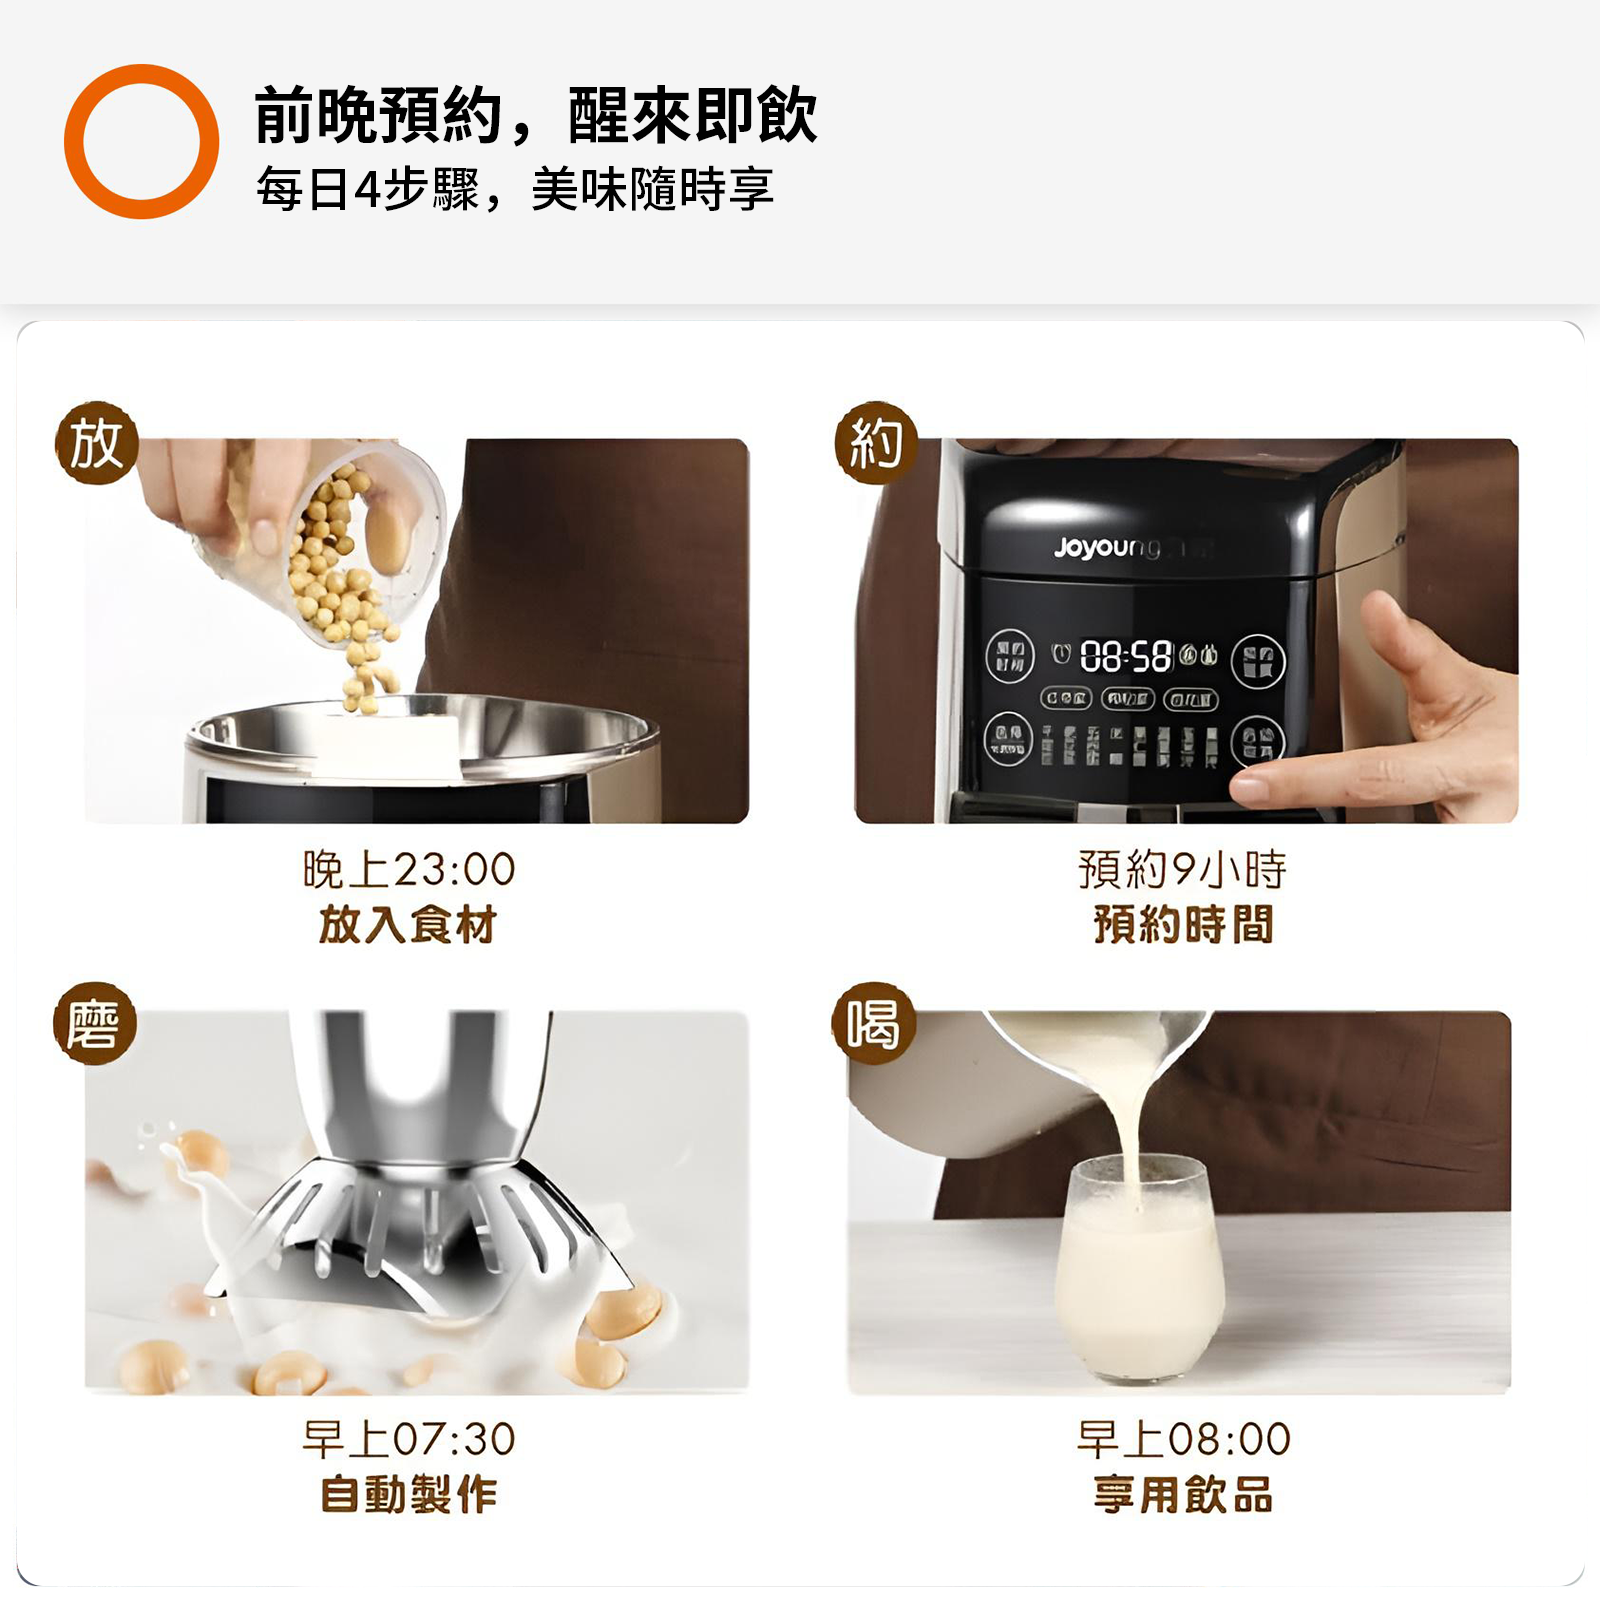 Joyoung Soy Milk Maker With Superfine